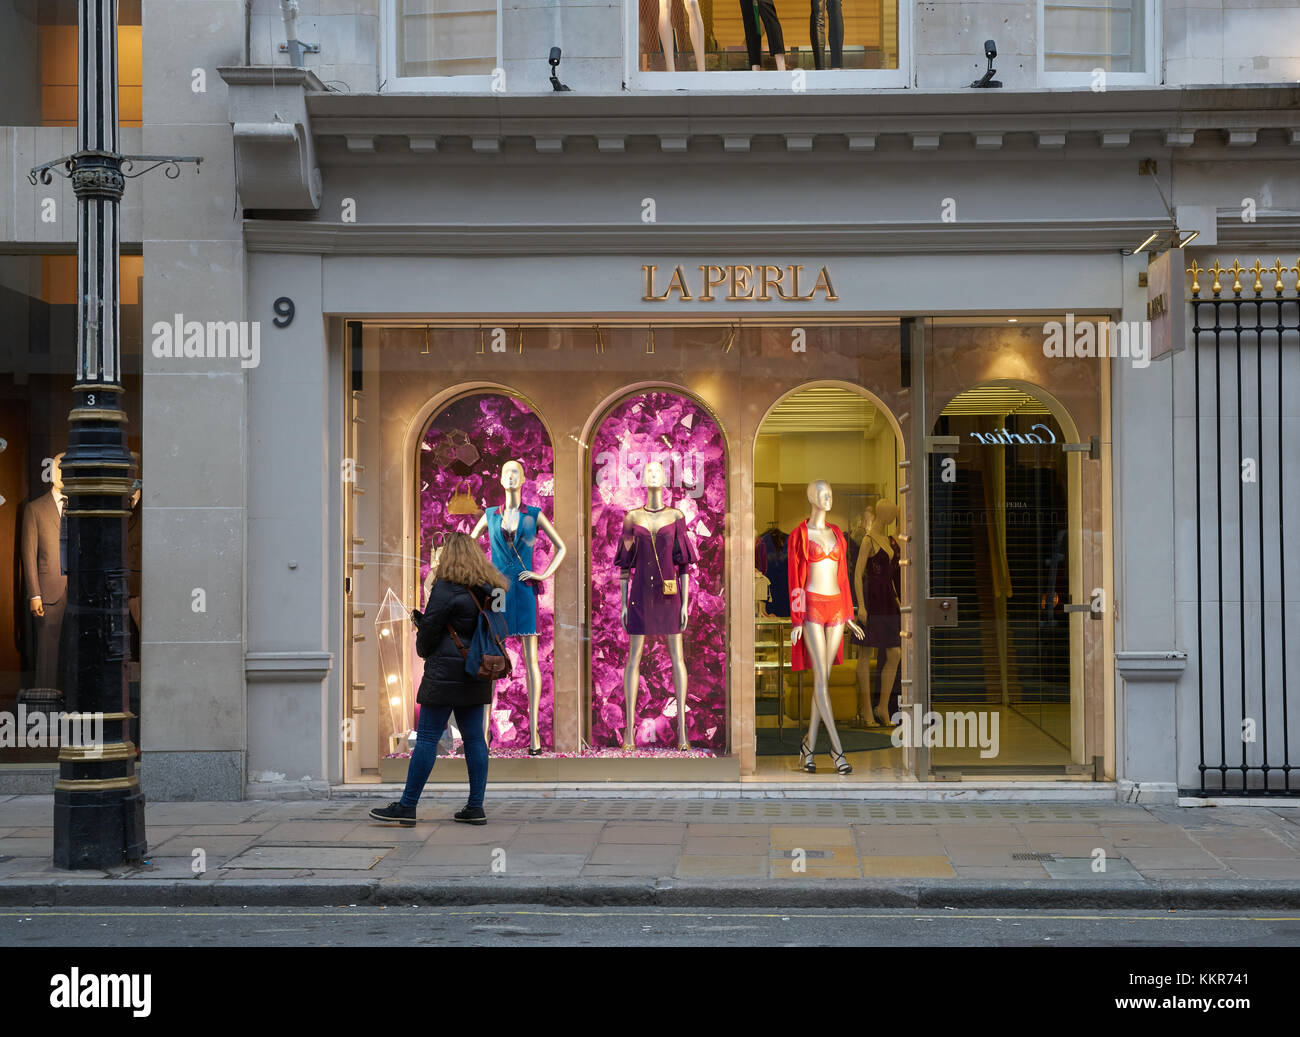 La Perla London High Resolution Stock Photography and Images - Alamy